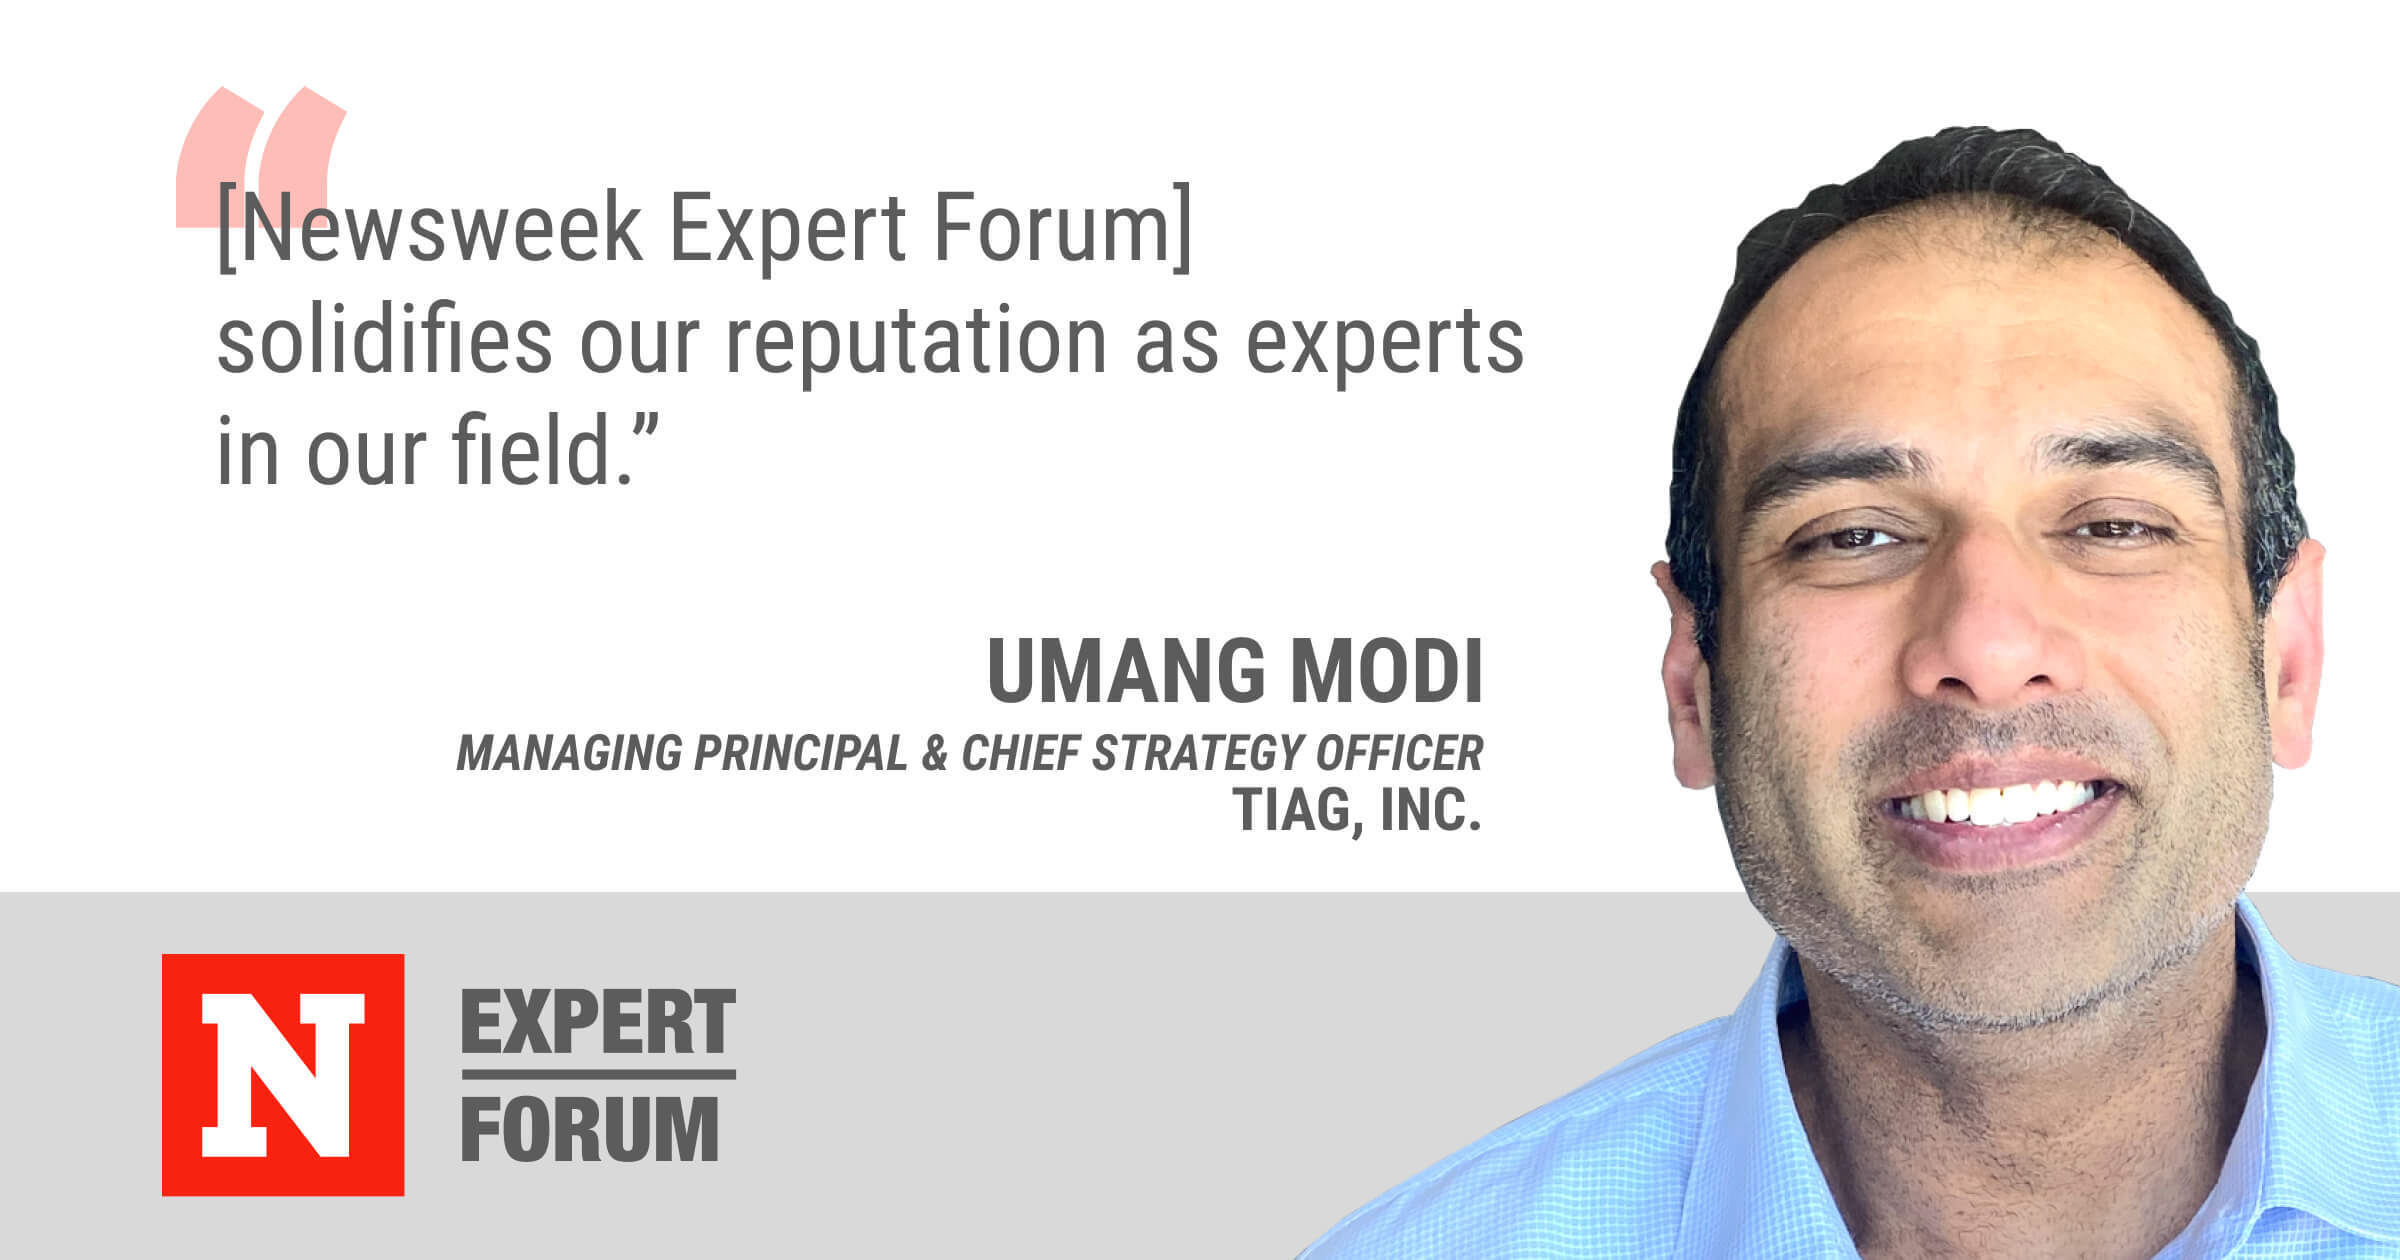 Newsweek Expert Forum Gives Umang Modi Increased Credibility As An Industry Expert